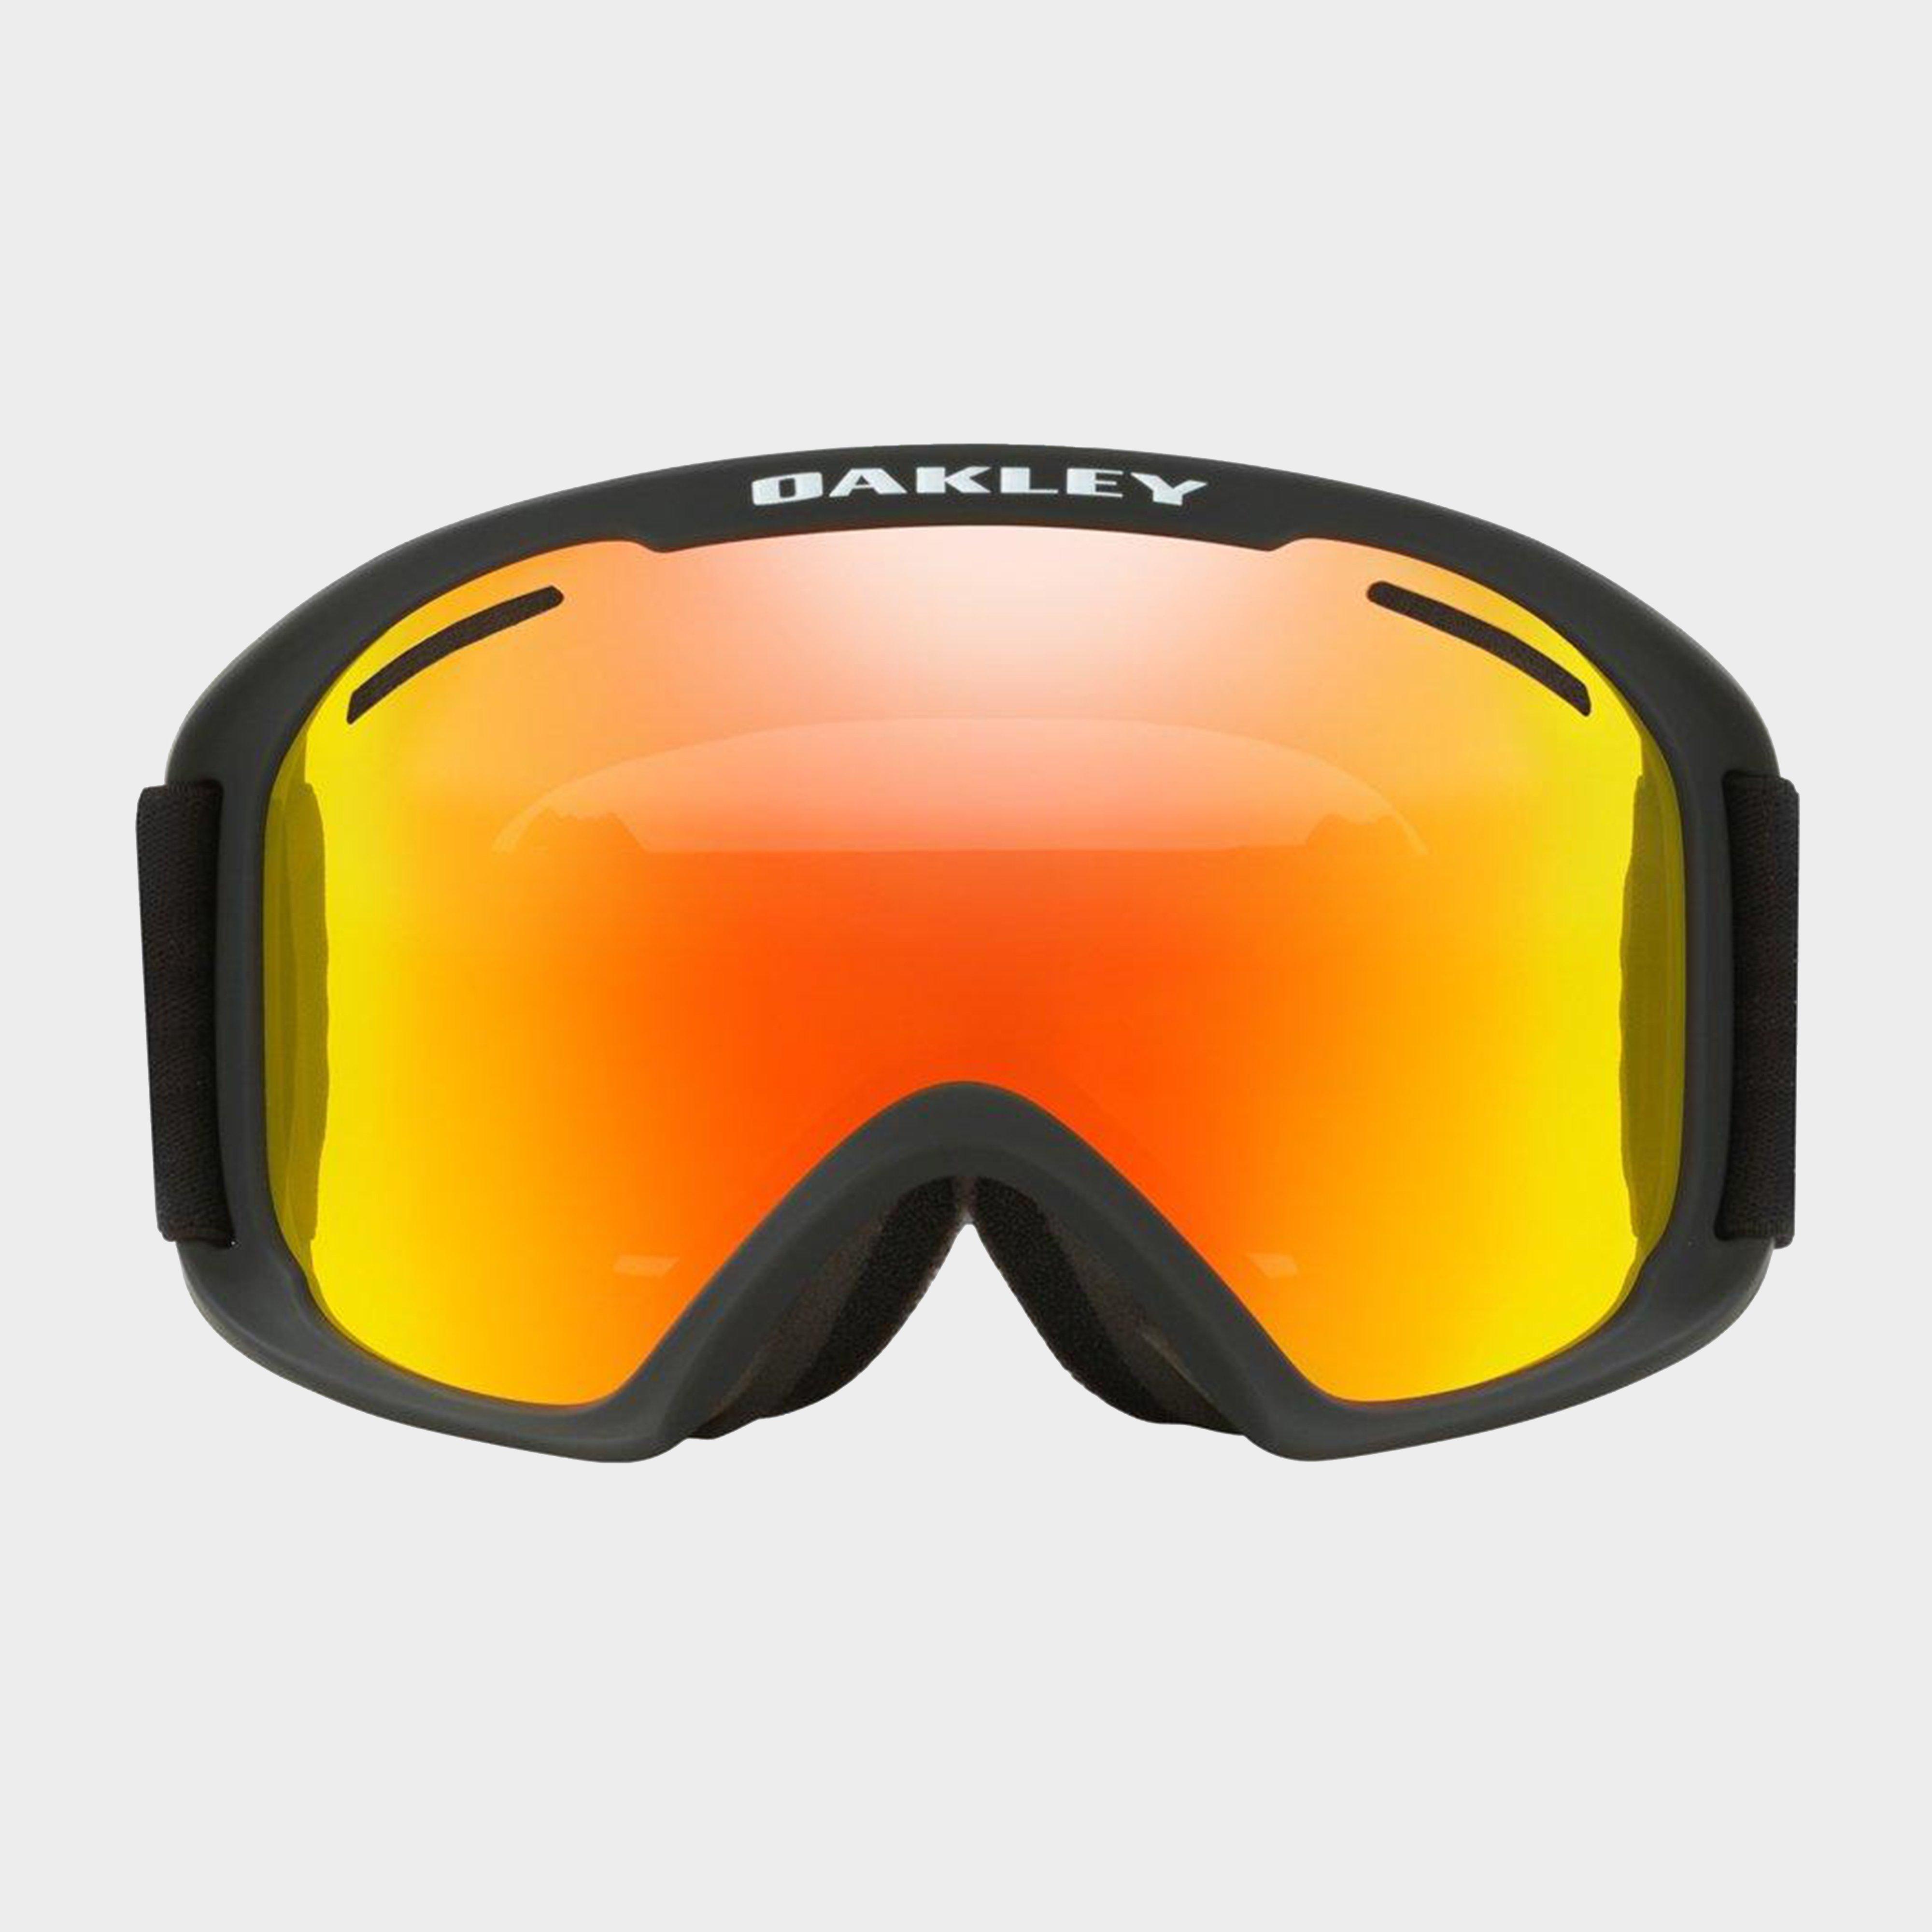 Oakley O Frame 2.0 PRO XL Snow Goggles Review